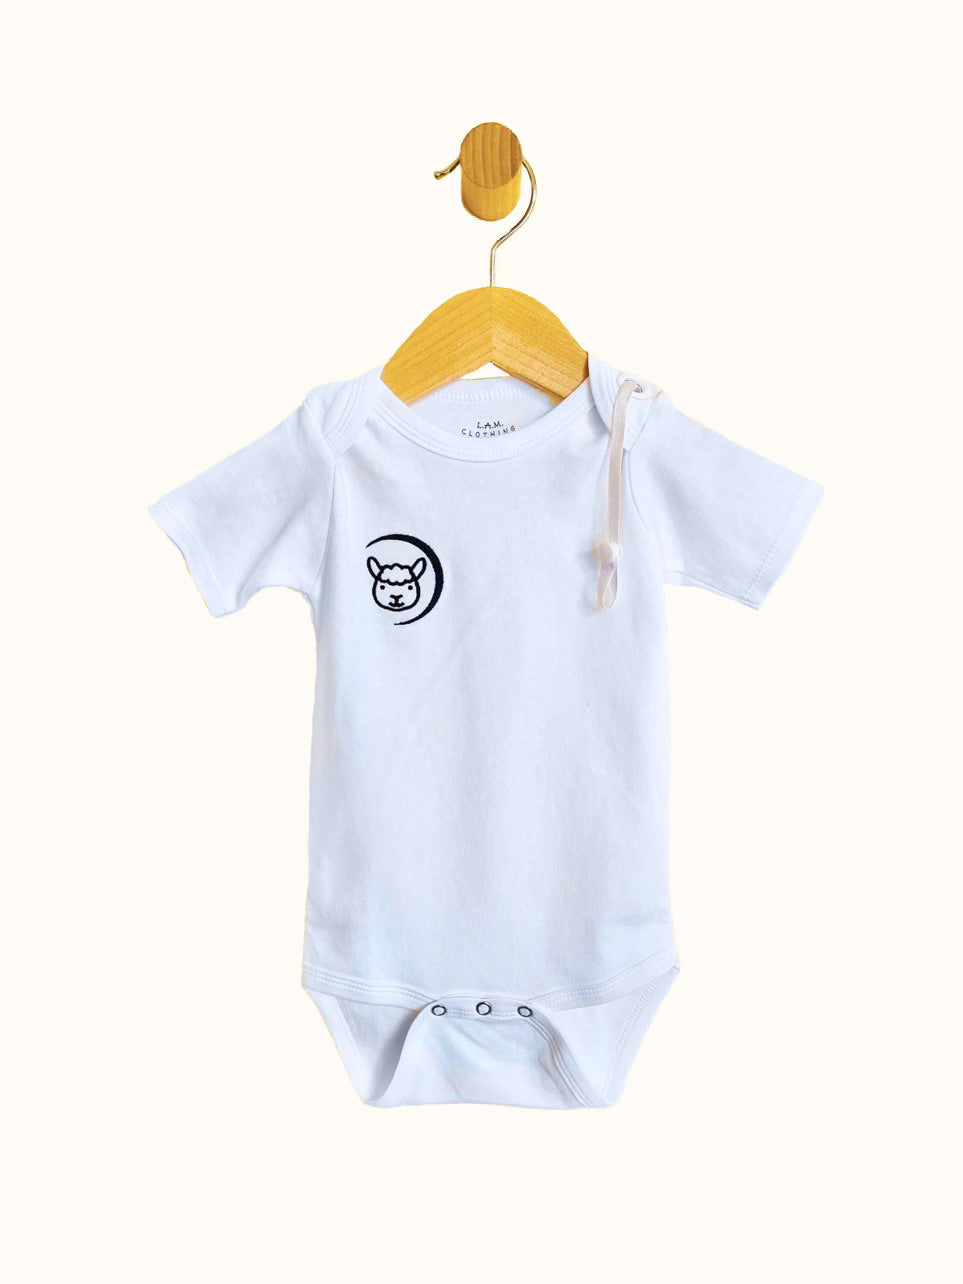 White short sleeve Baby Bodysuit with pacifier strap and snap crotch